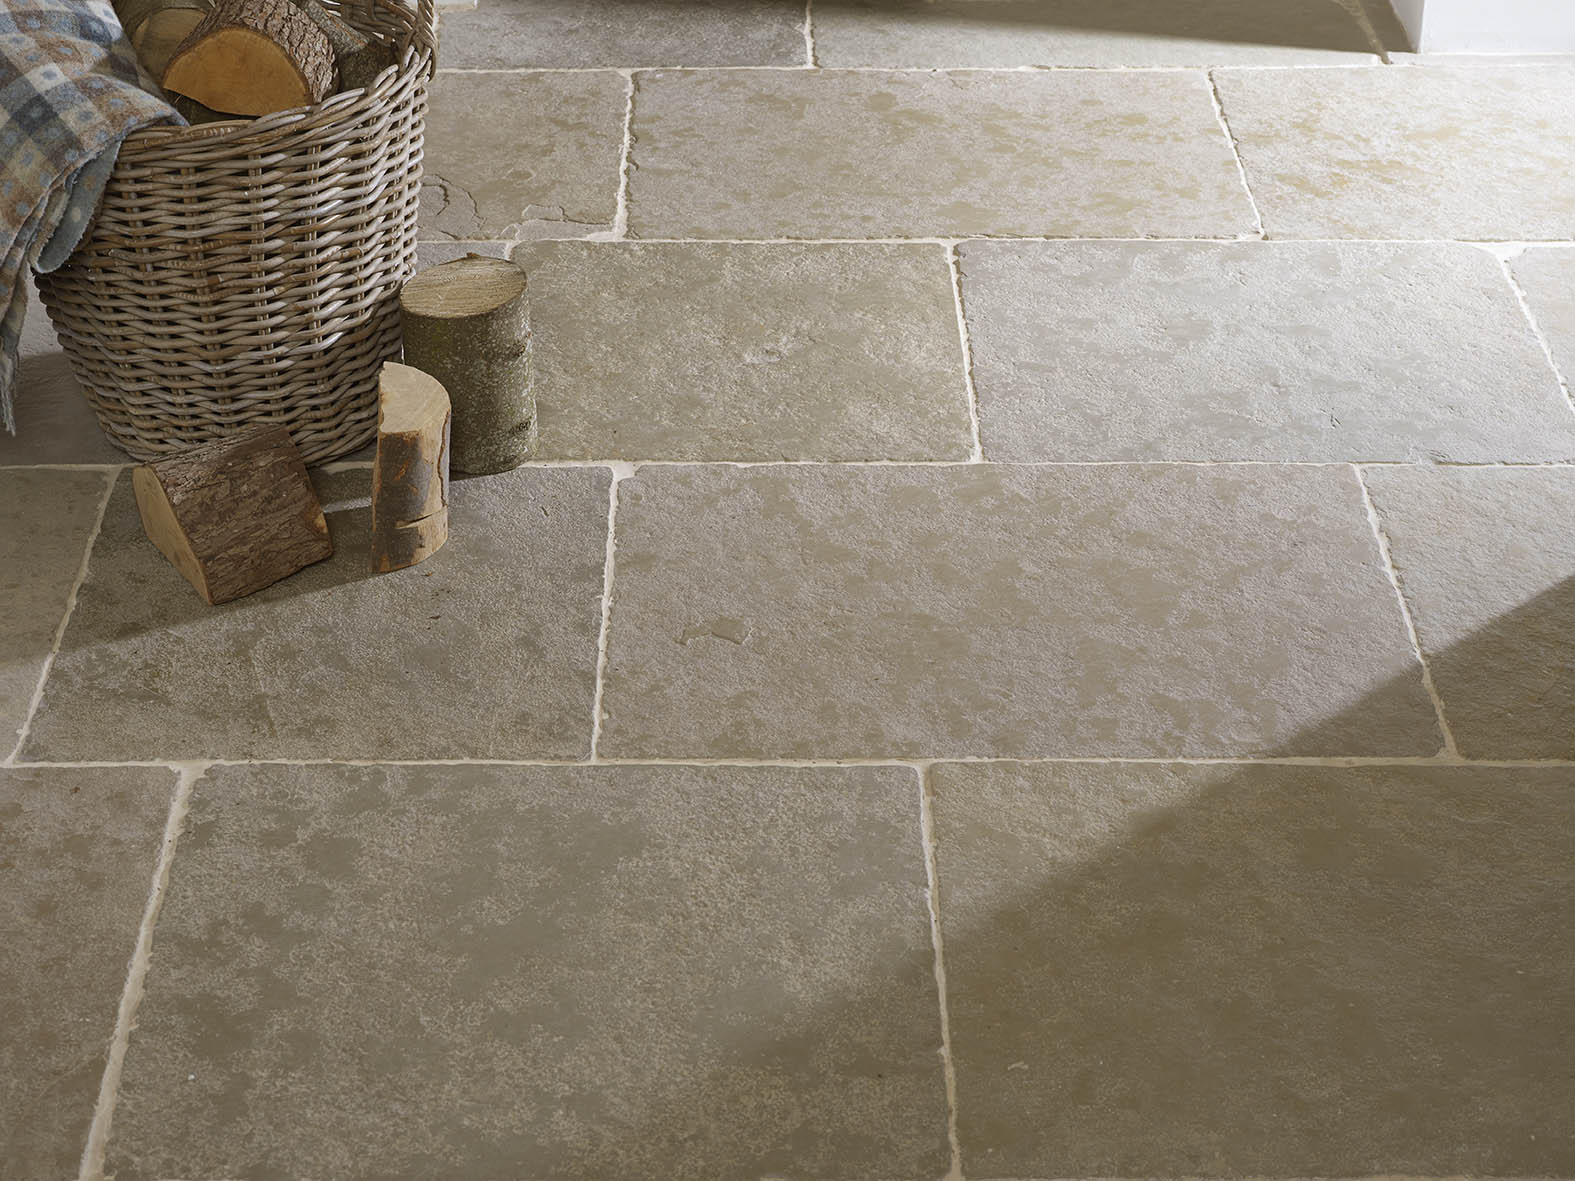 Flagstone Flooring- The trend that stands the test of time